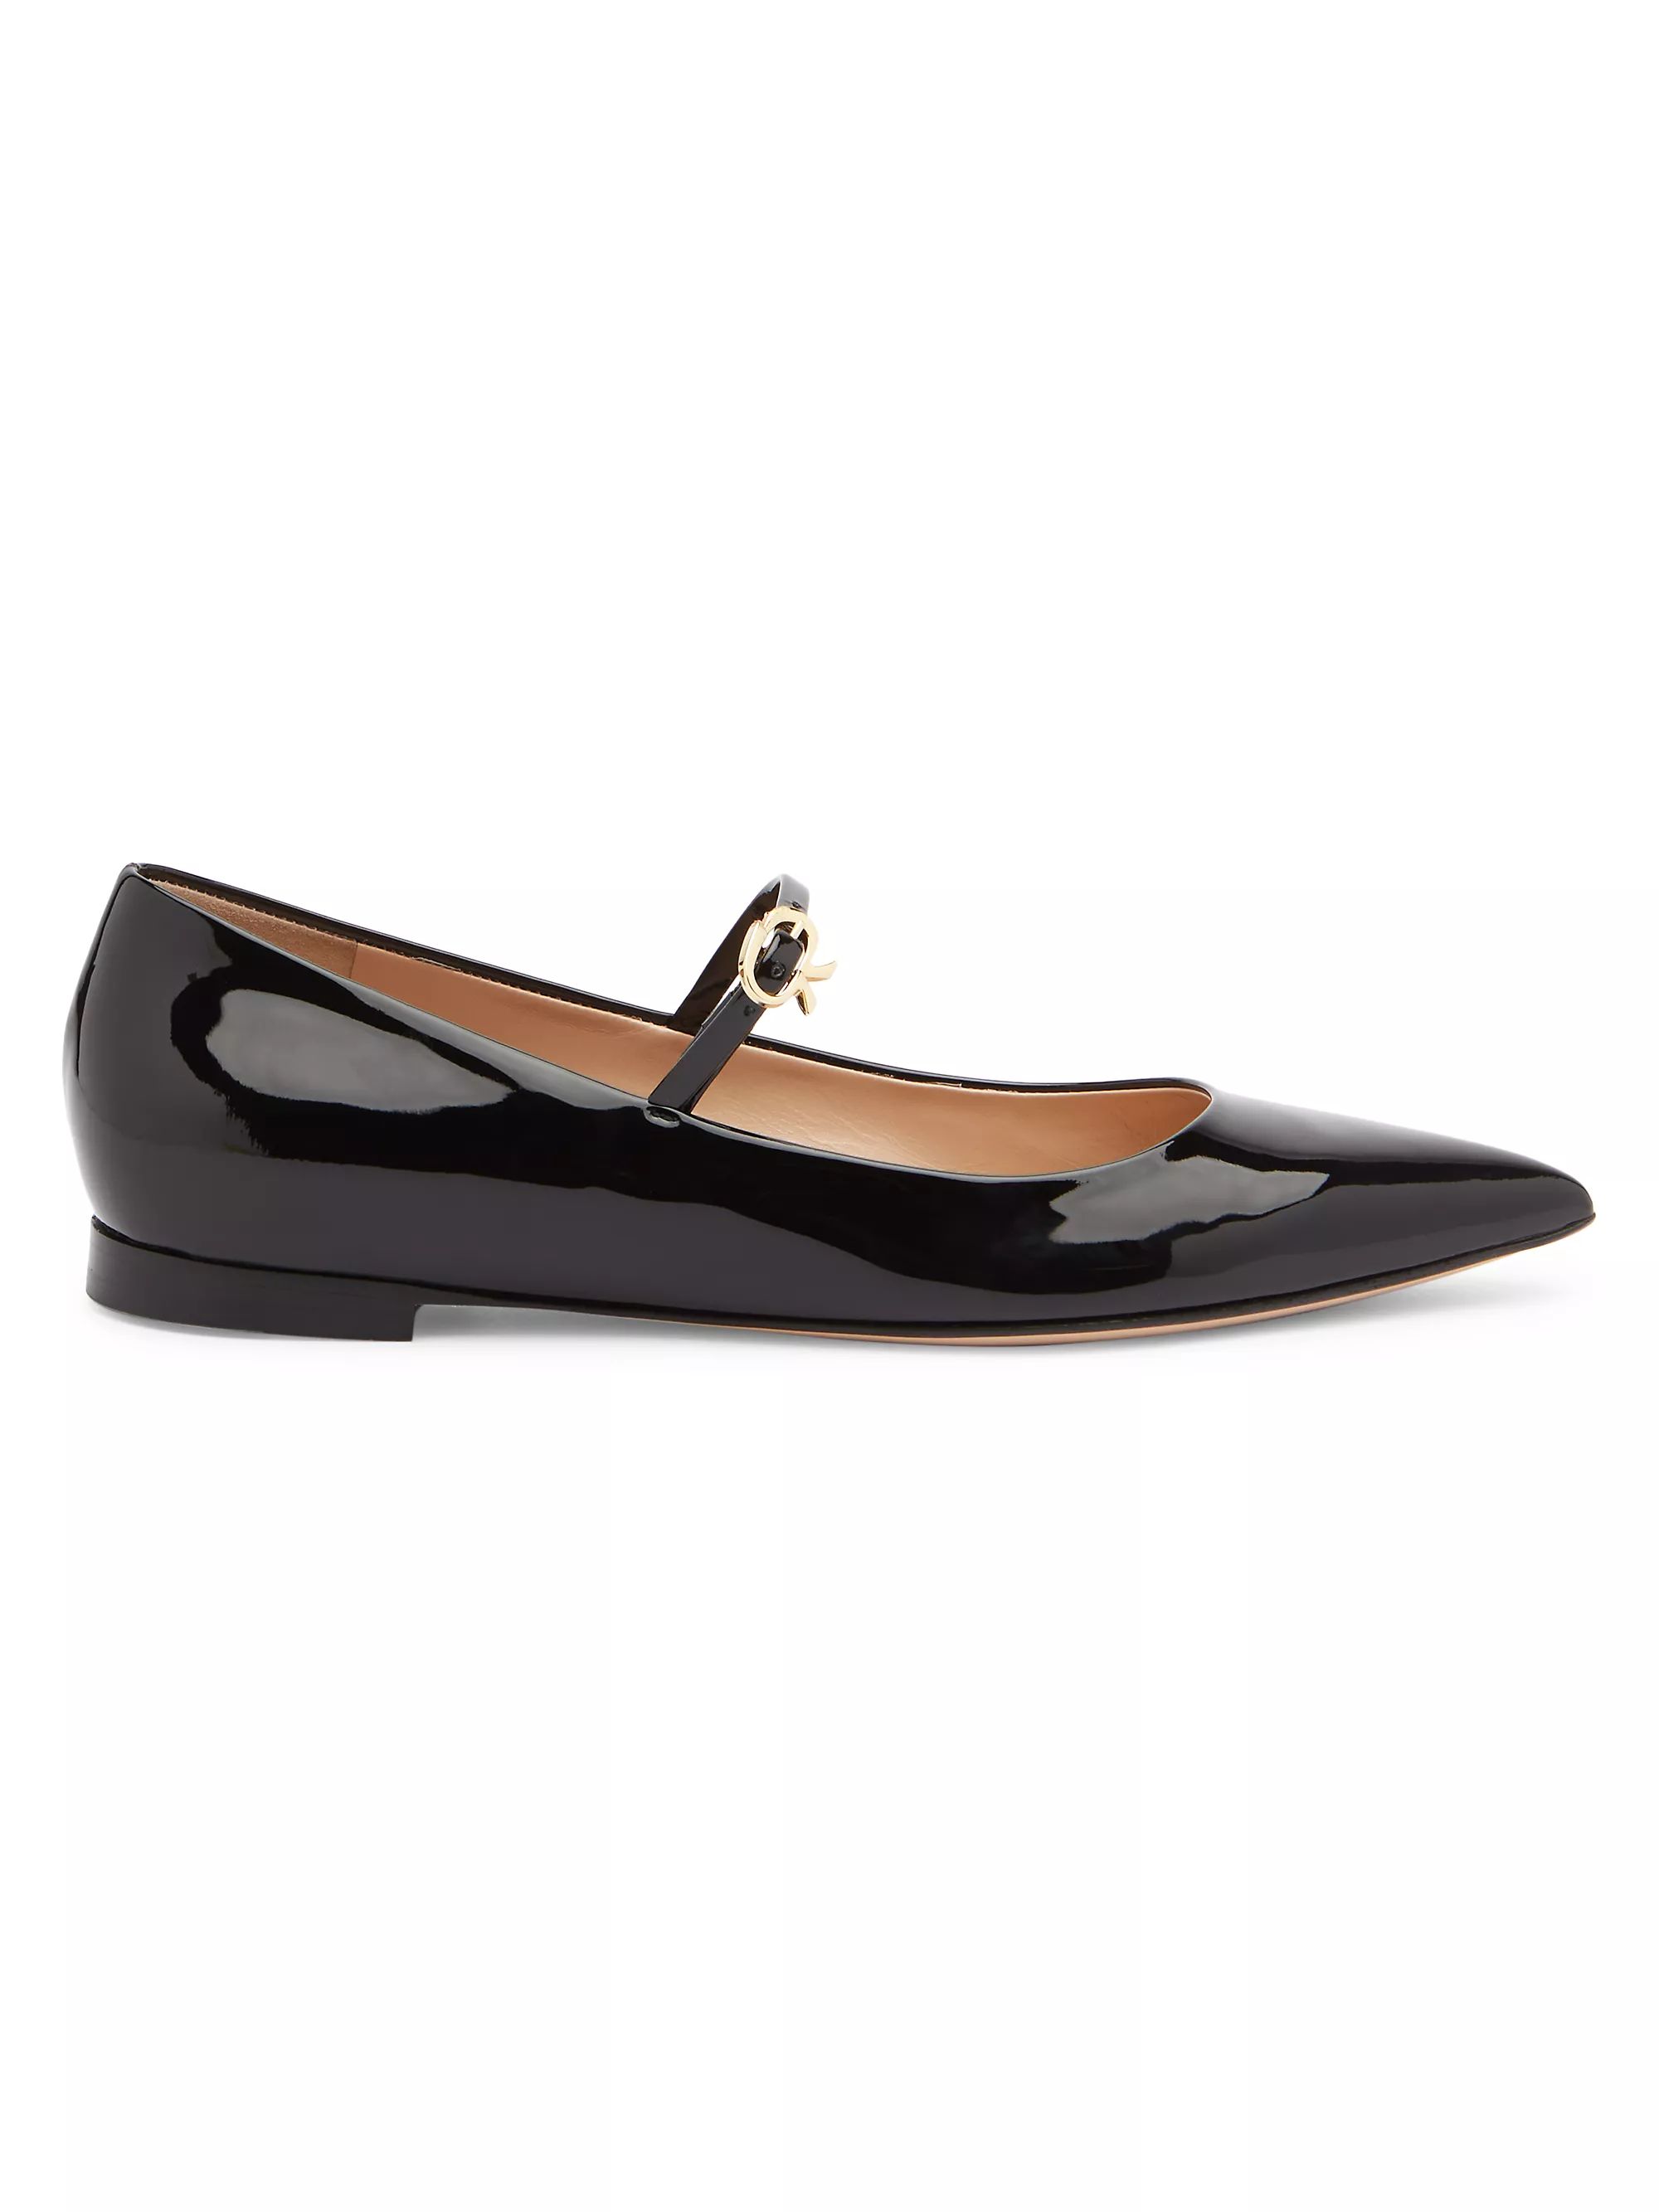 Patent Leather Ballet Flats | Saks Fifth Avenue